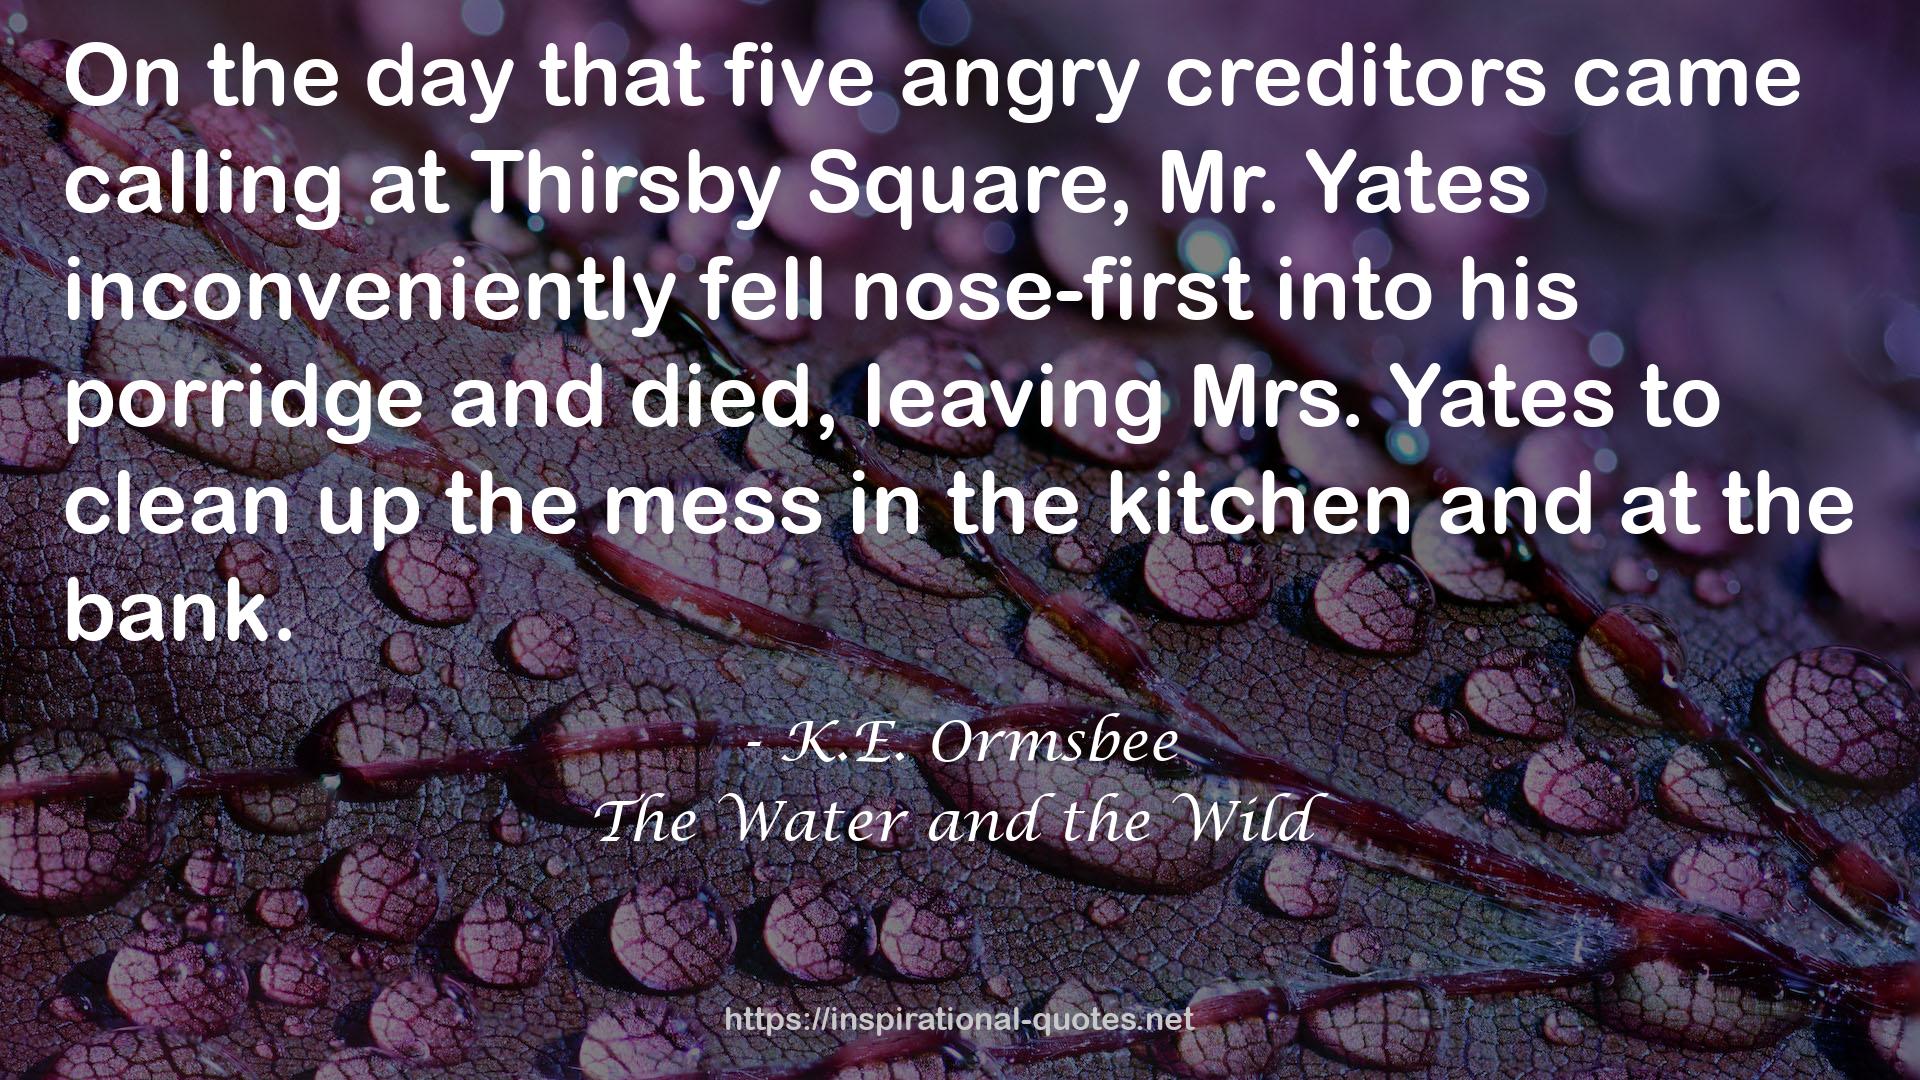 The Water and the Wild QUOTES